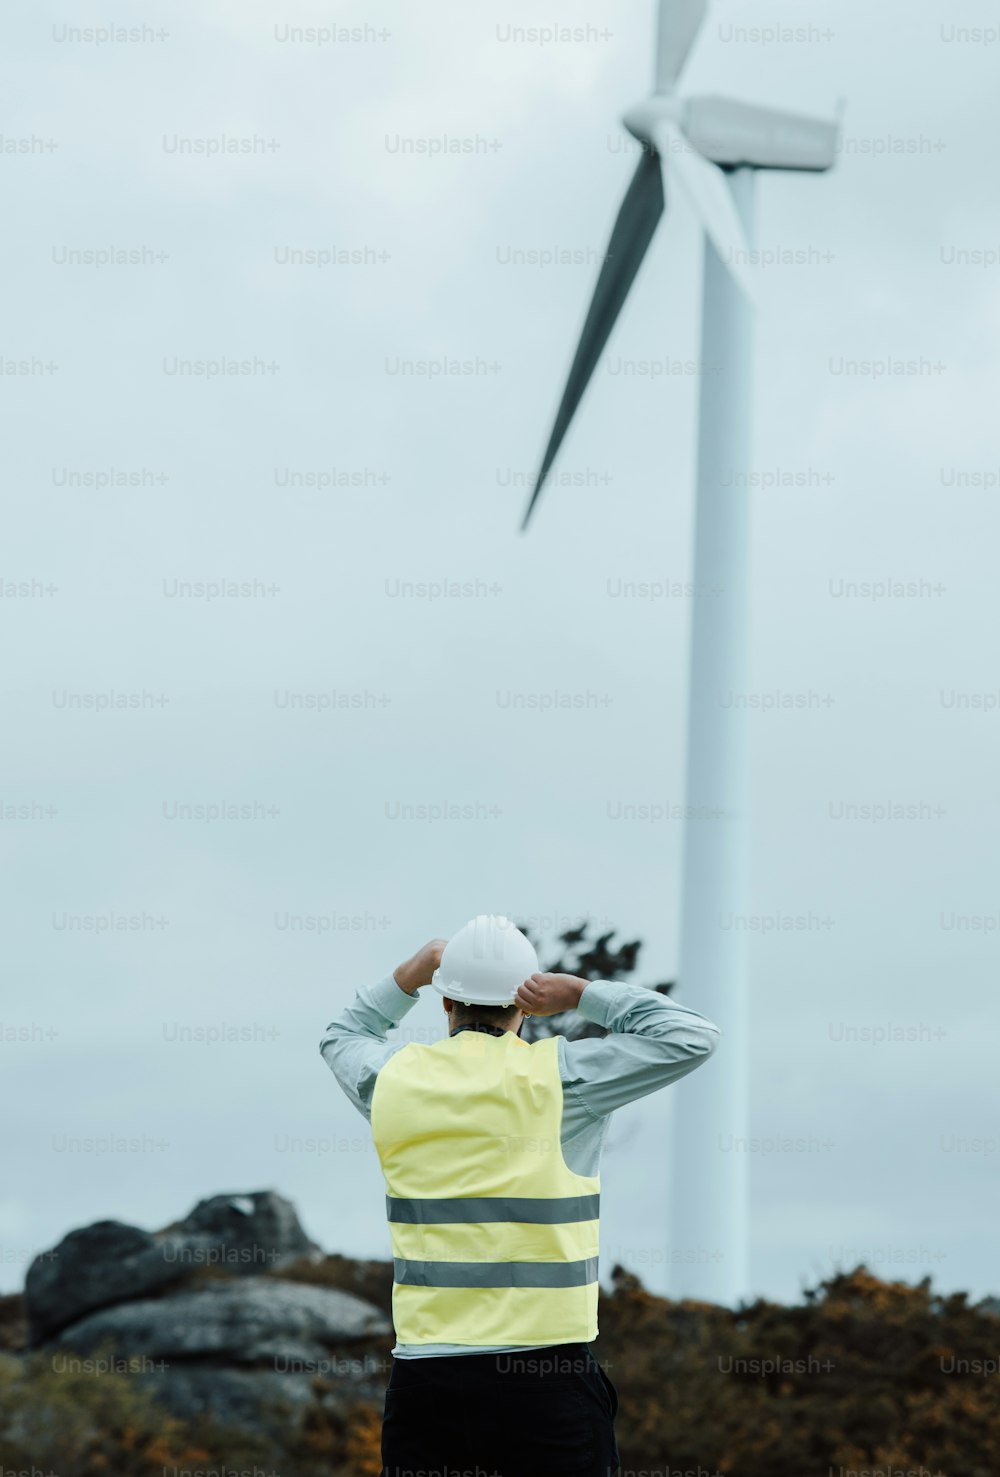 a man in a yellow vest standing in front of a wind turbine